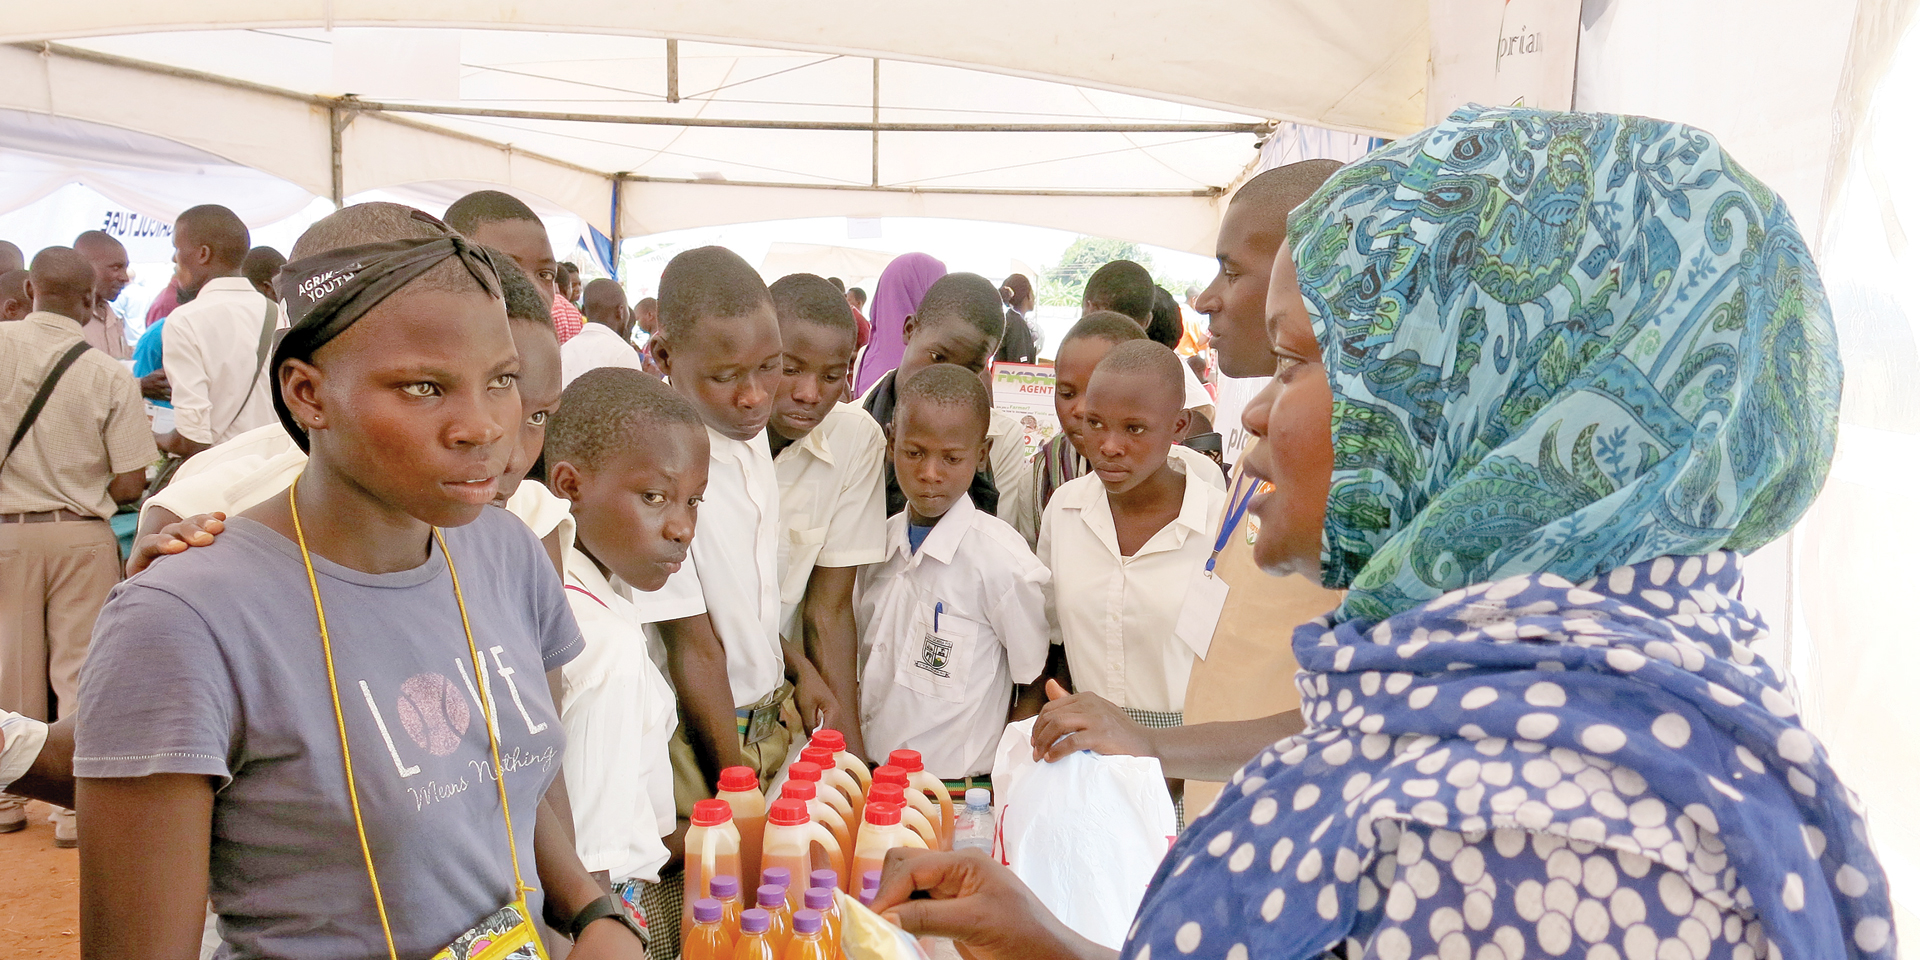 A woman at a juice stand speaking to youth.